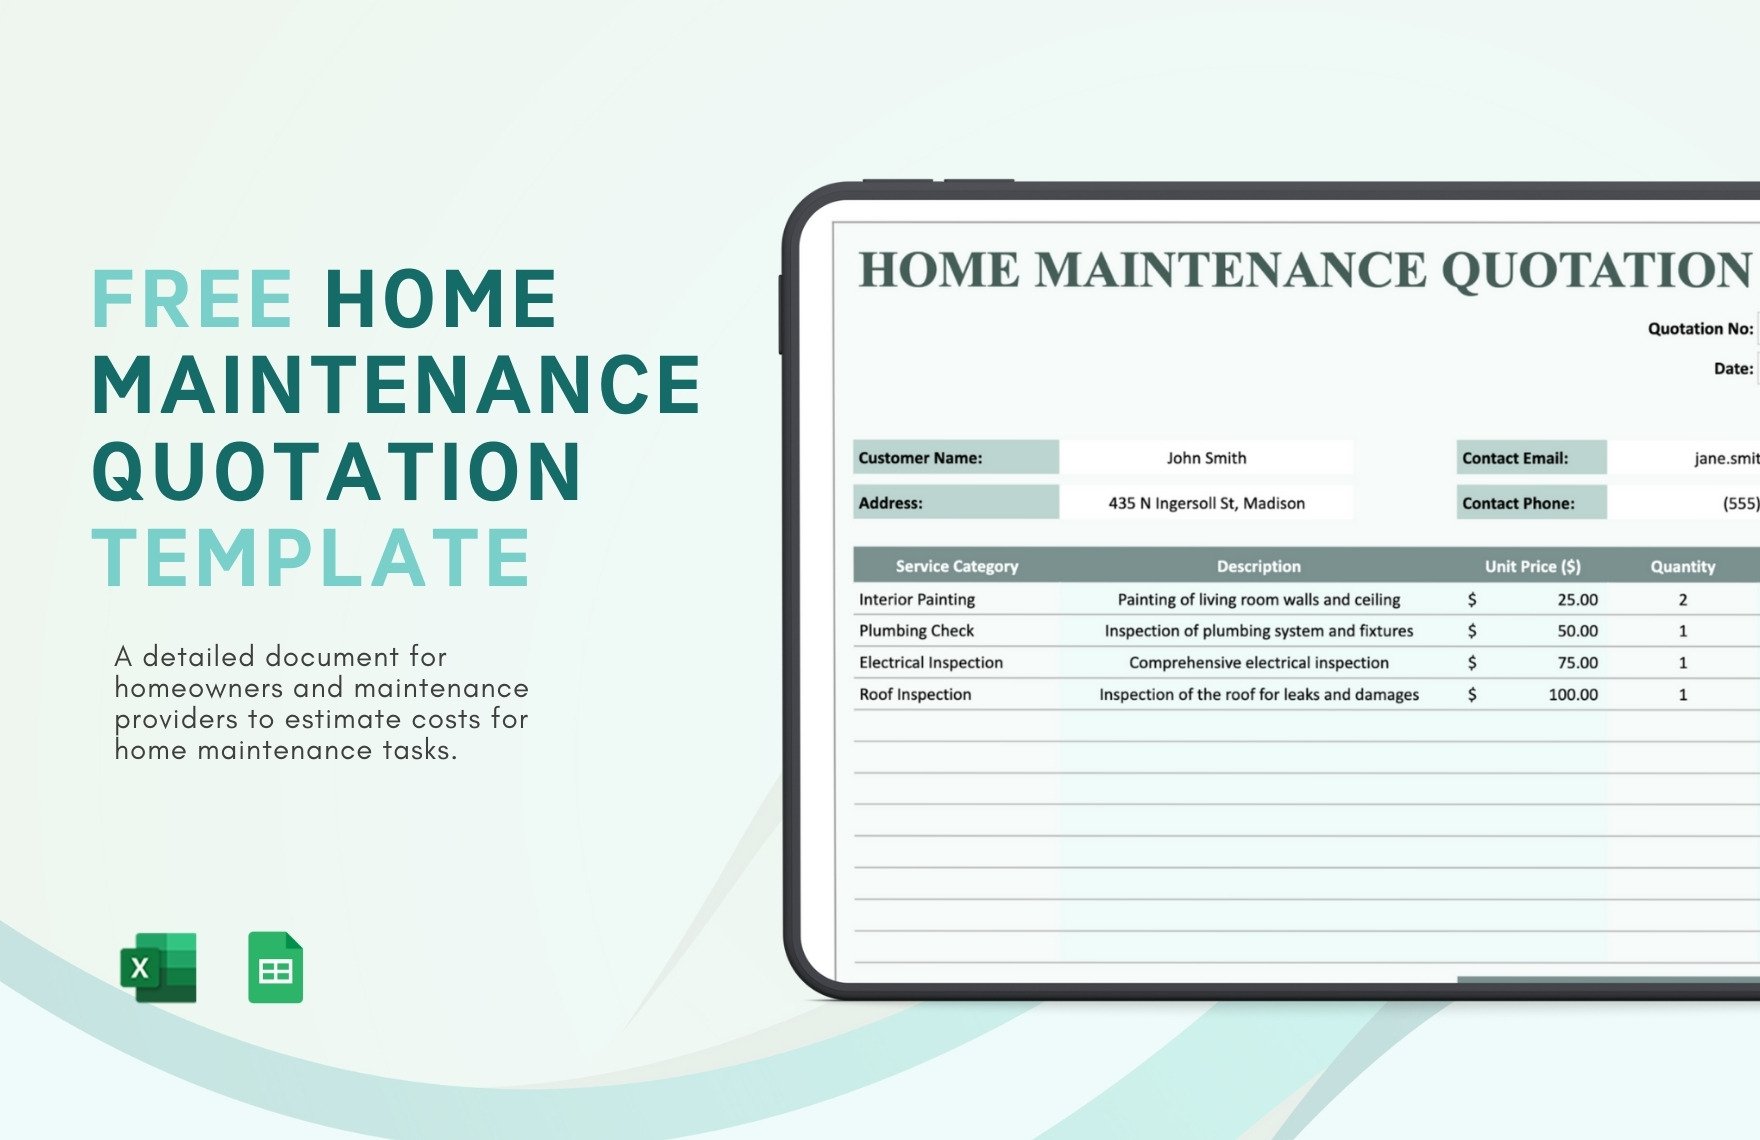 Maintenance Quotation Template in Google Sheets